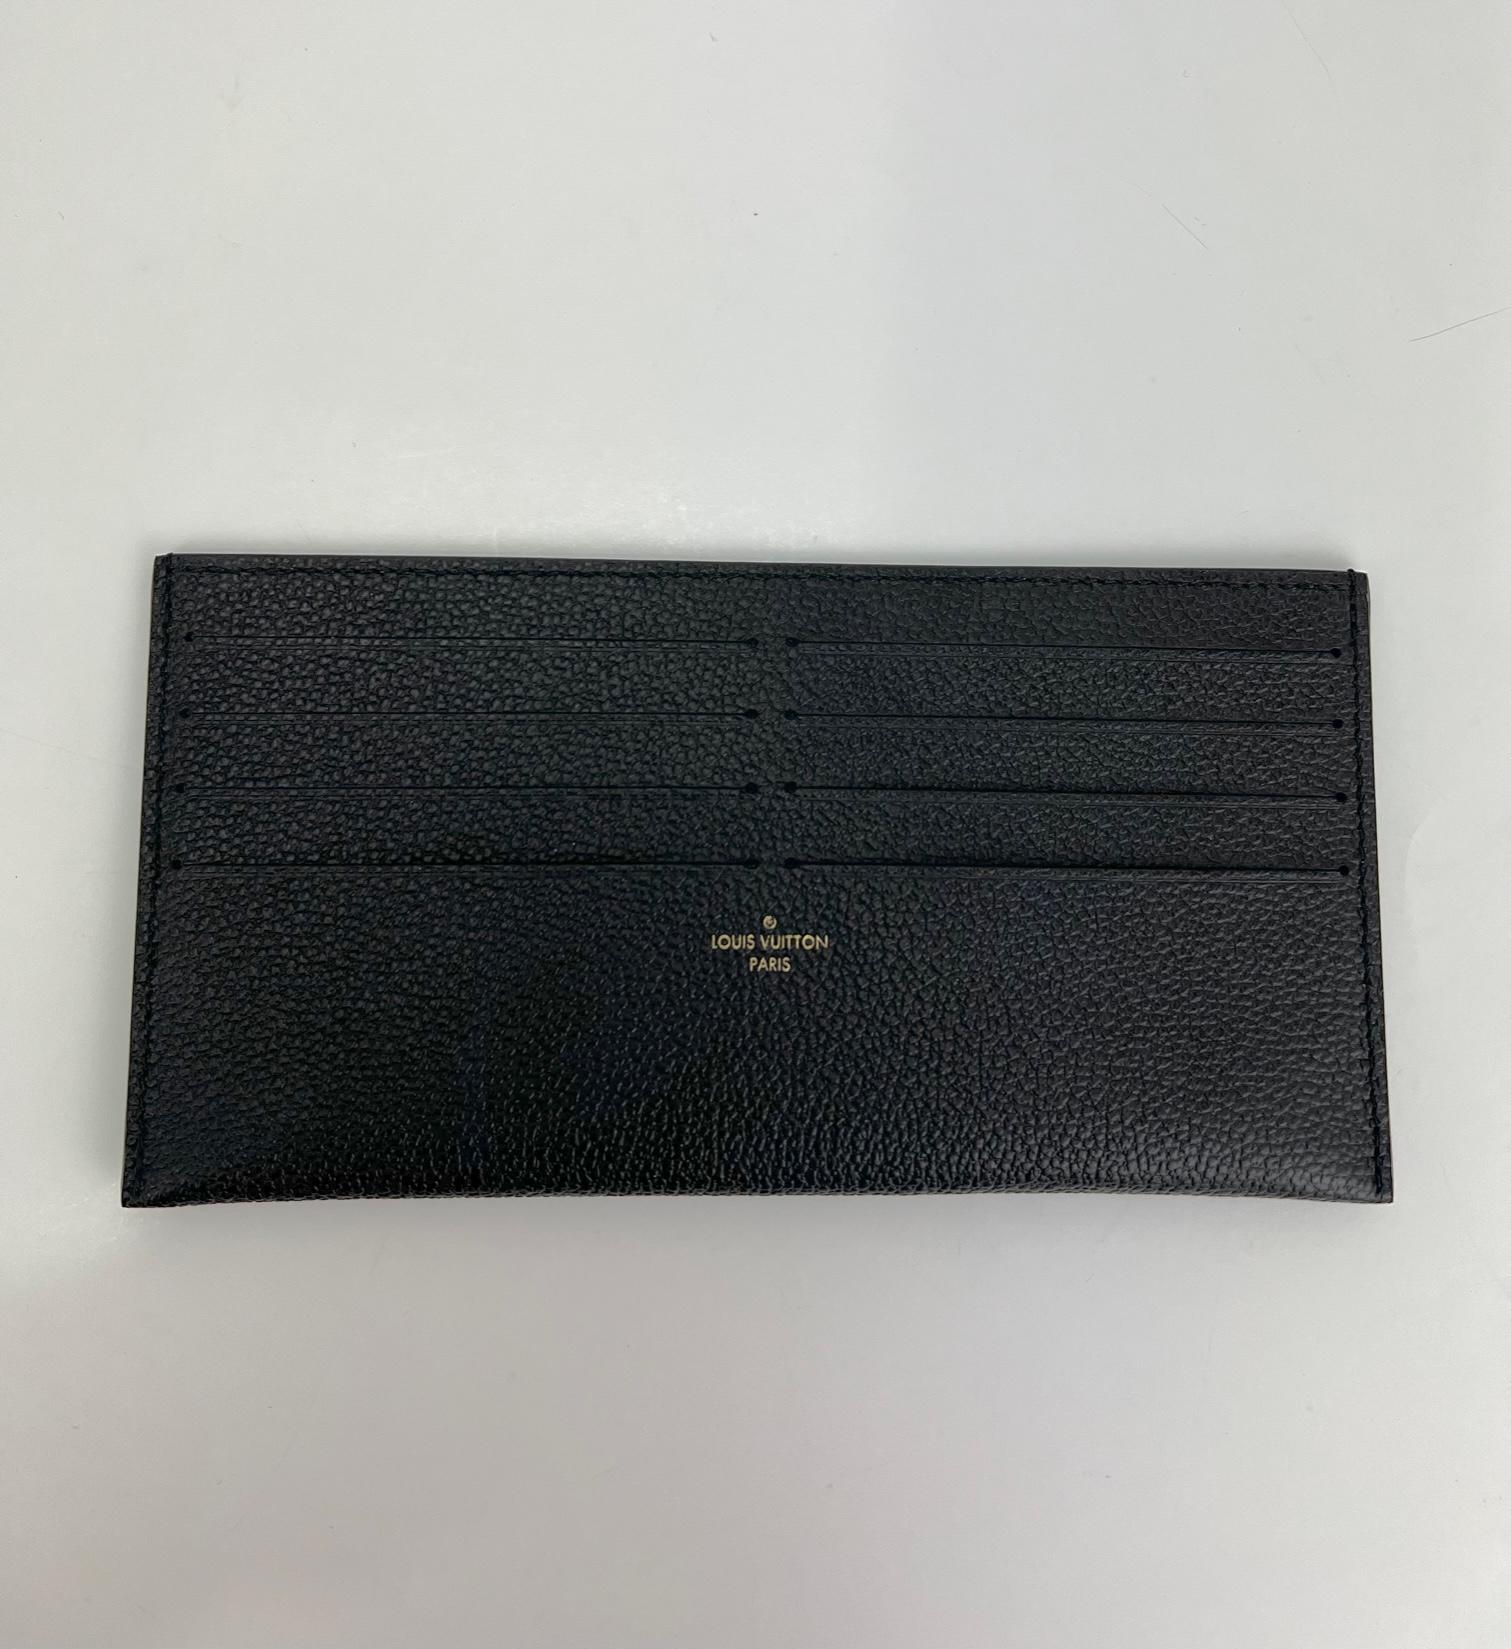  Like New 100% Authentic
Louis Vuitton Credit Card Insert Black
Empreinte Leather from Felicie
RATING: A...Excellent, near mint, shows slight 
sign of wear
MATERIAL:  empriente leather
COLOR: black
EXTERIOR: excellent
INTERIOR: like new
DATE CODE: